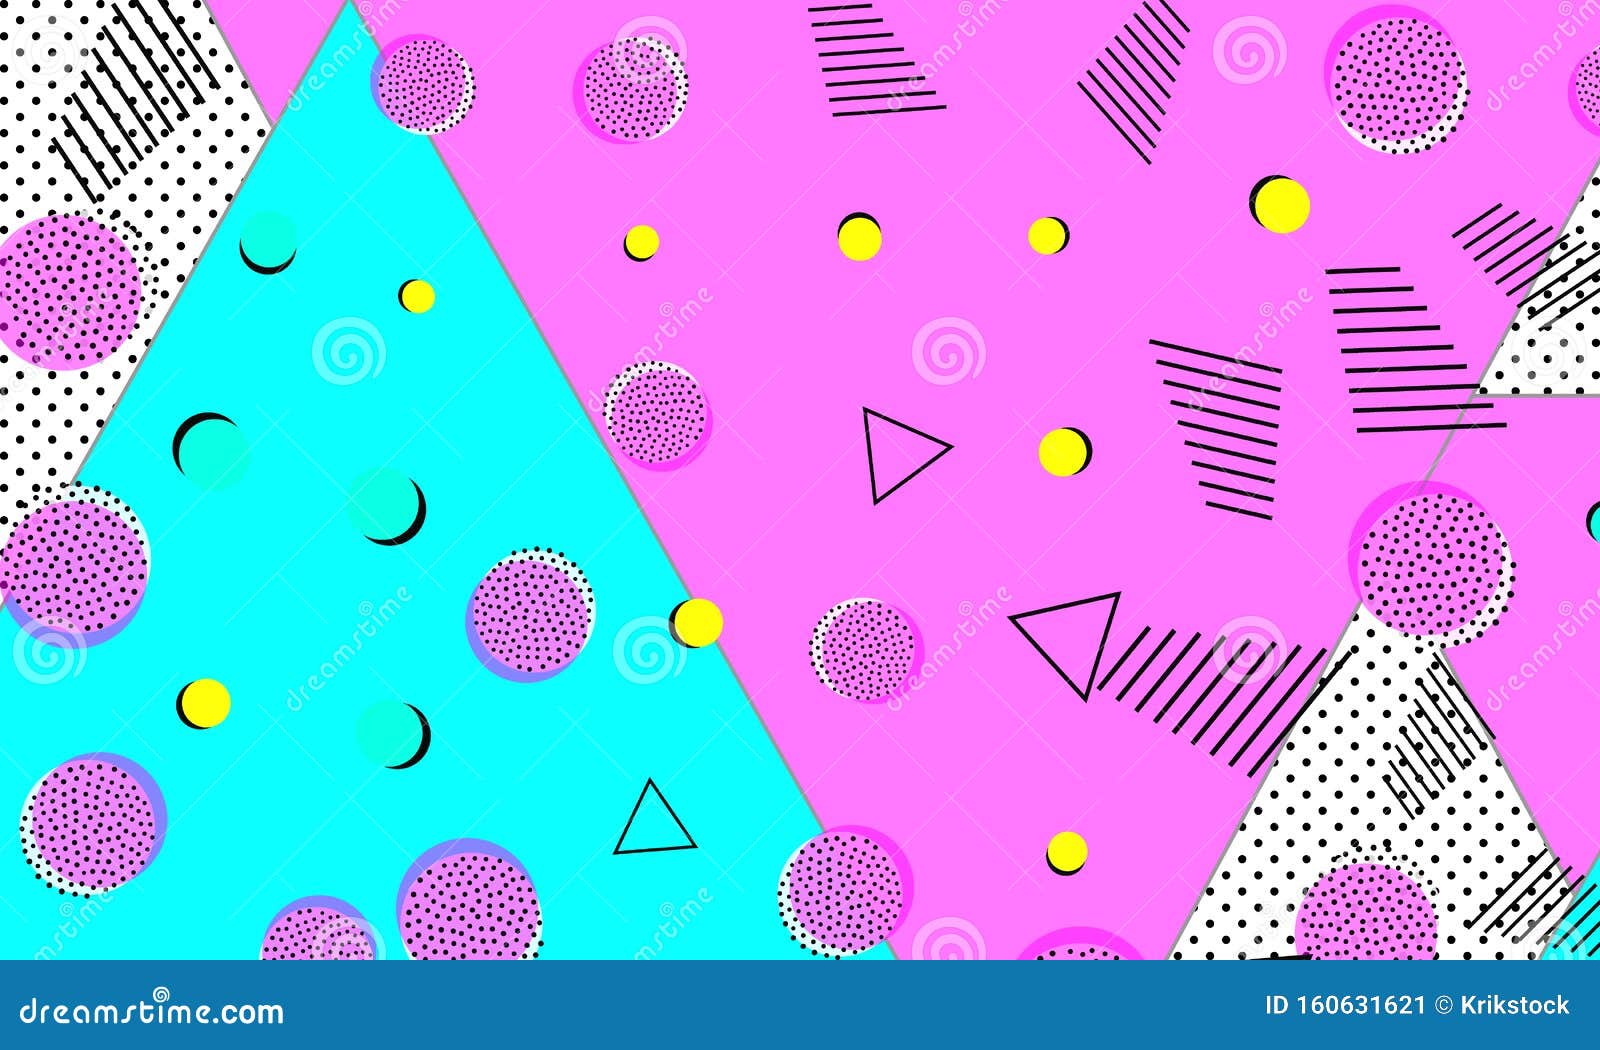 Magenta Funky Wallpaper. Turquoise Halftone Stock Vector - Illustration of  prints, blue: 160631621